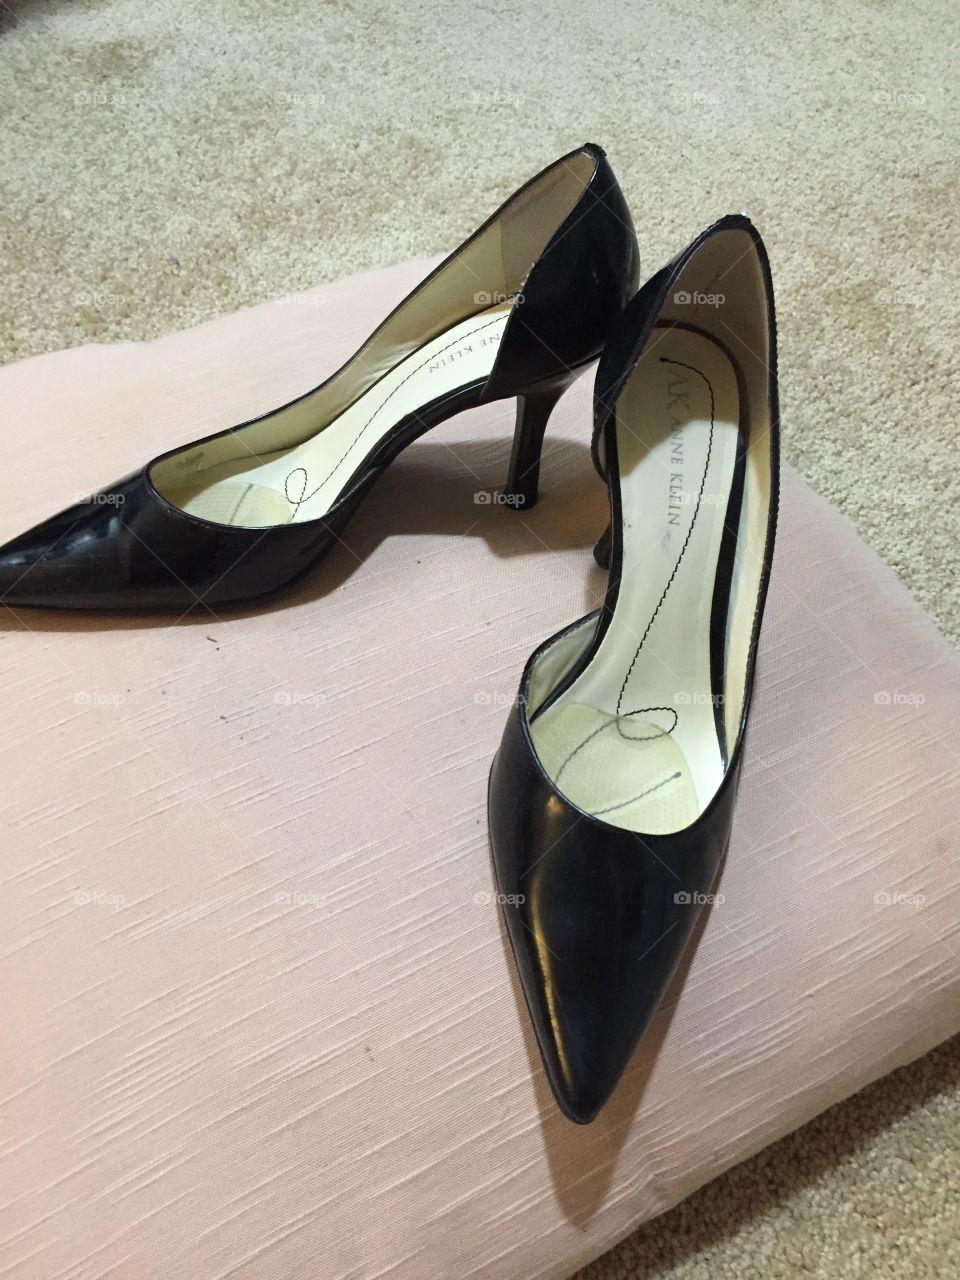 High heels, pump, white heels, black shoes, classy, classic, pointy toes, black, 3 inches